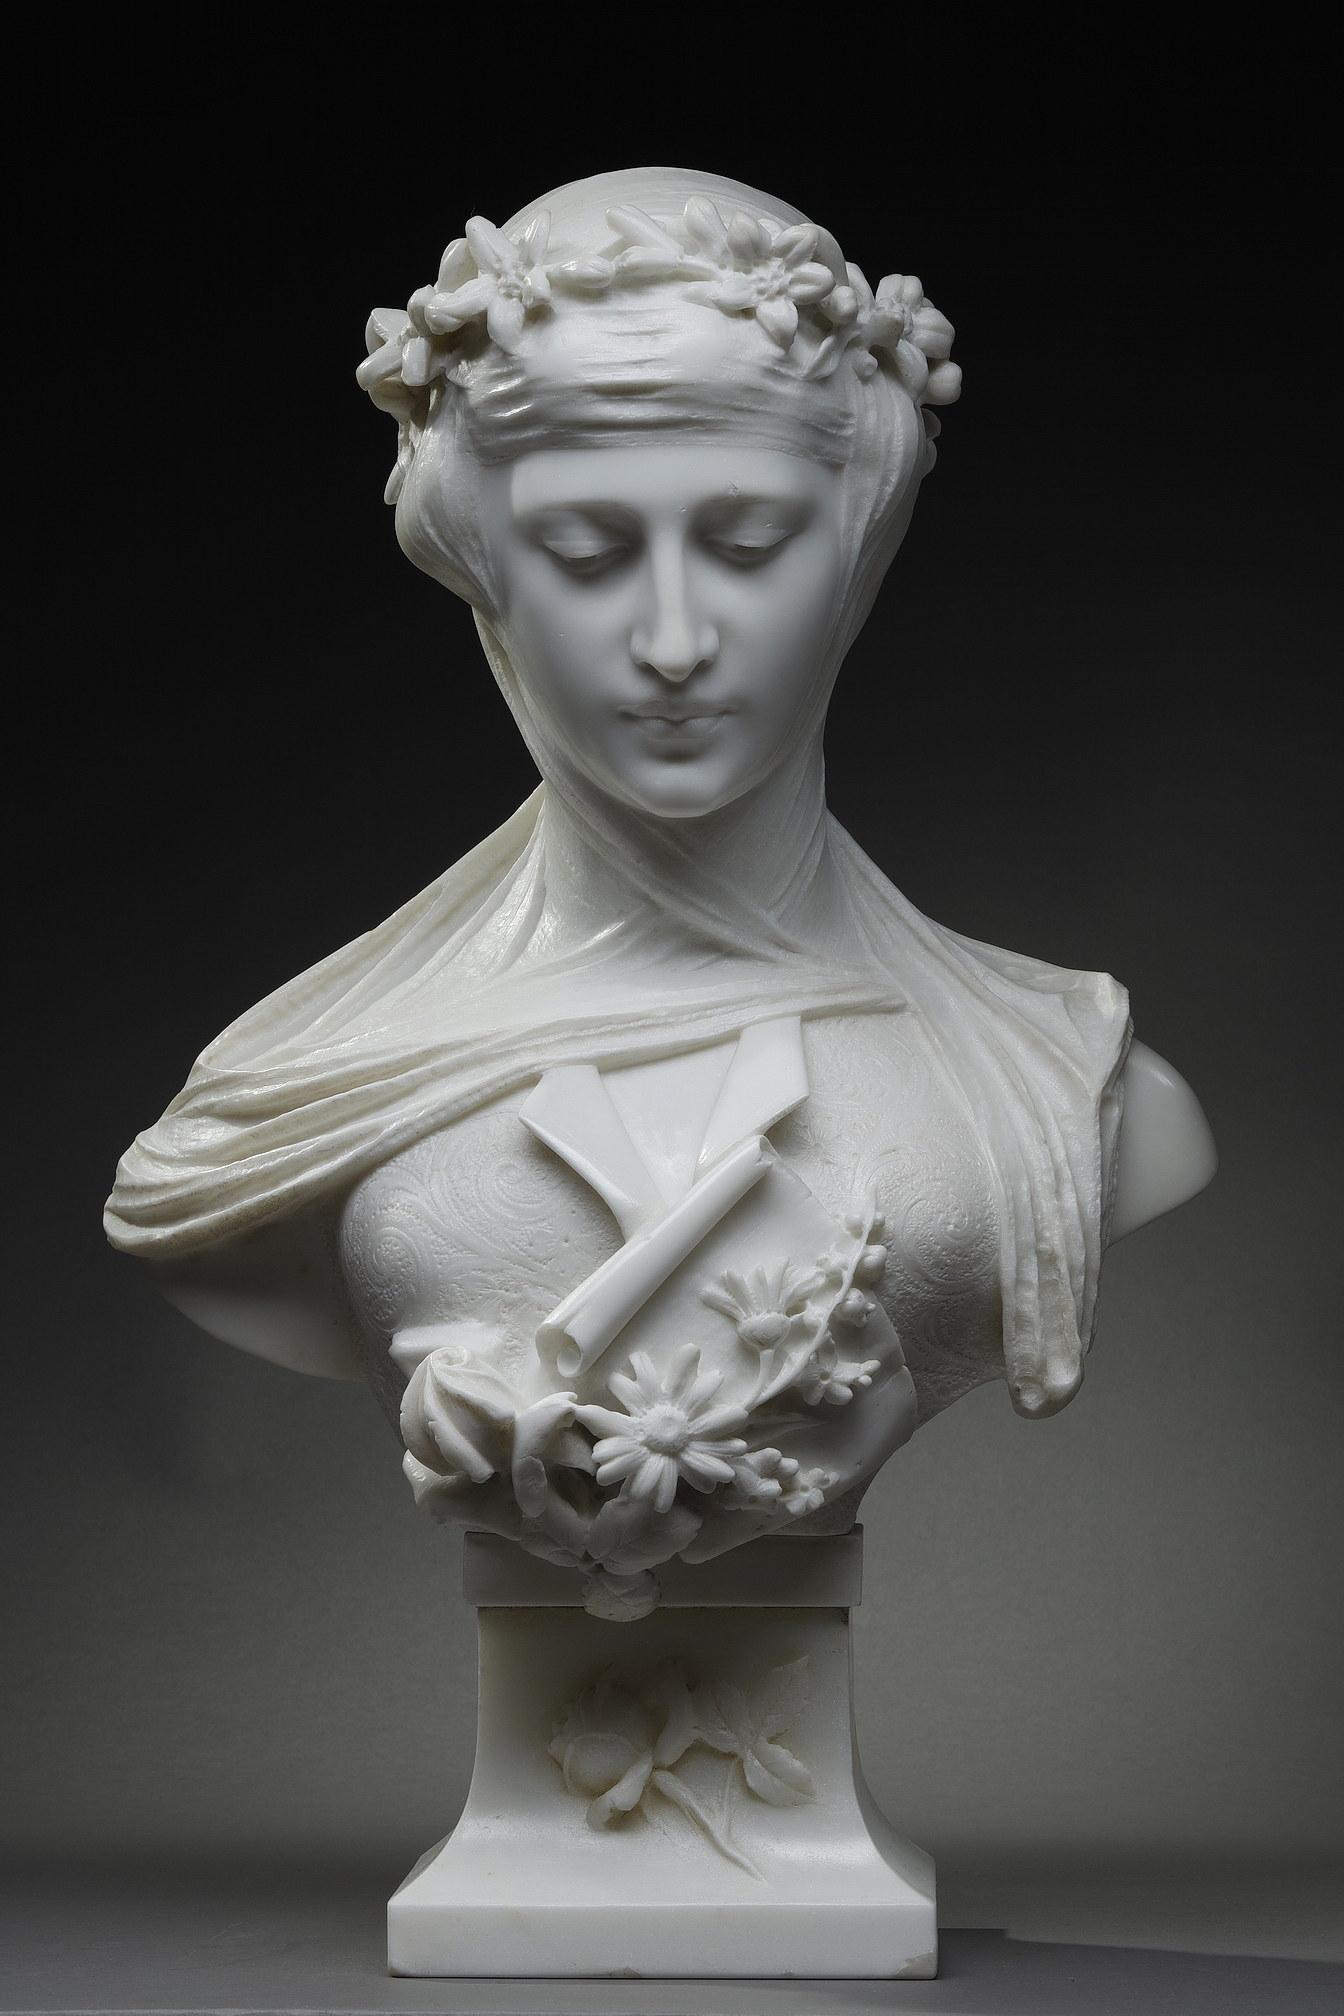 Bust in white marble of Carrara representing a woman with a veil crowned with flowers. The very delicate work of her dress and veil finely engraved are typical of the Italian school of the late nineteenth century. Her bust is decorated with daisies,